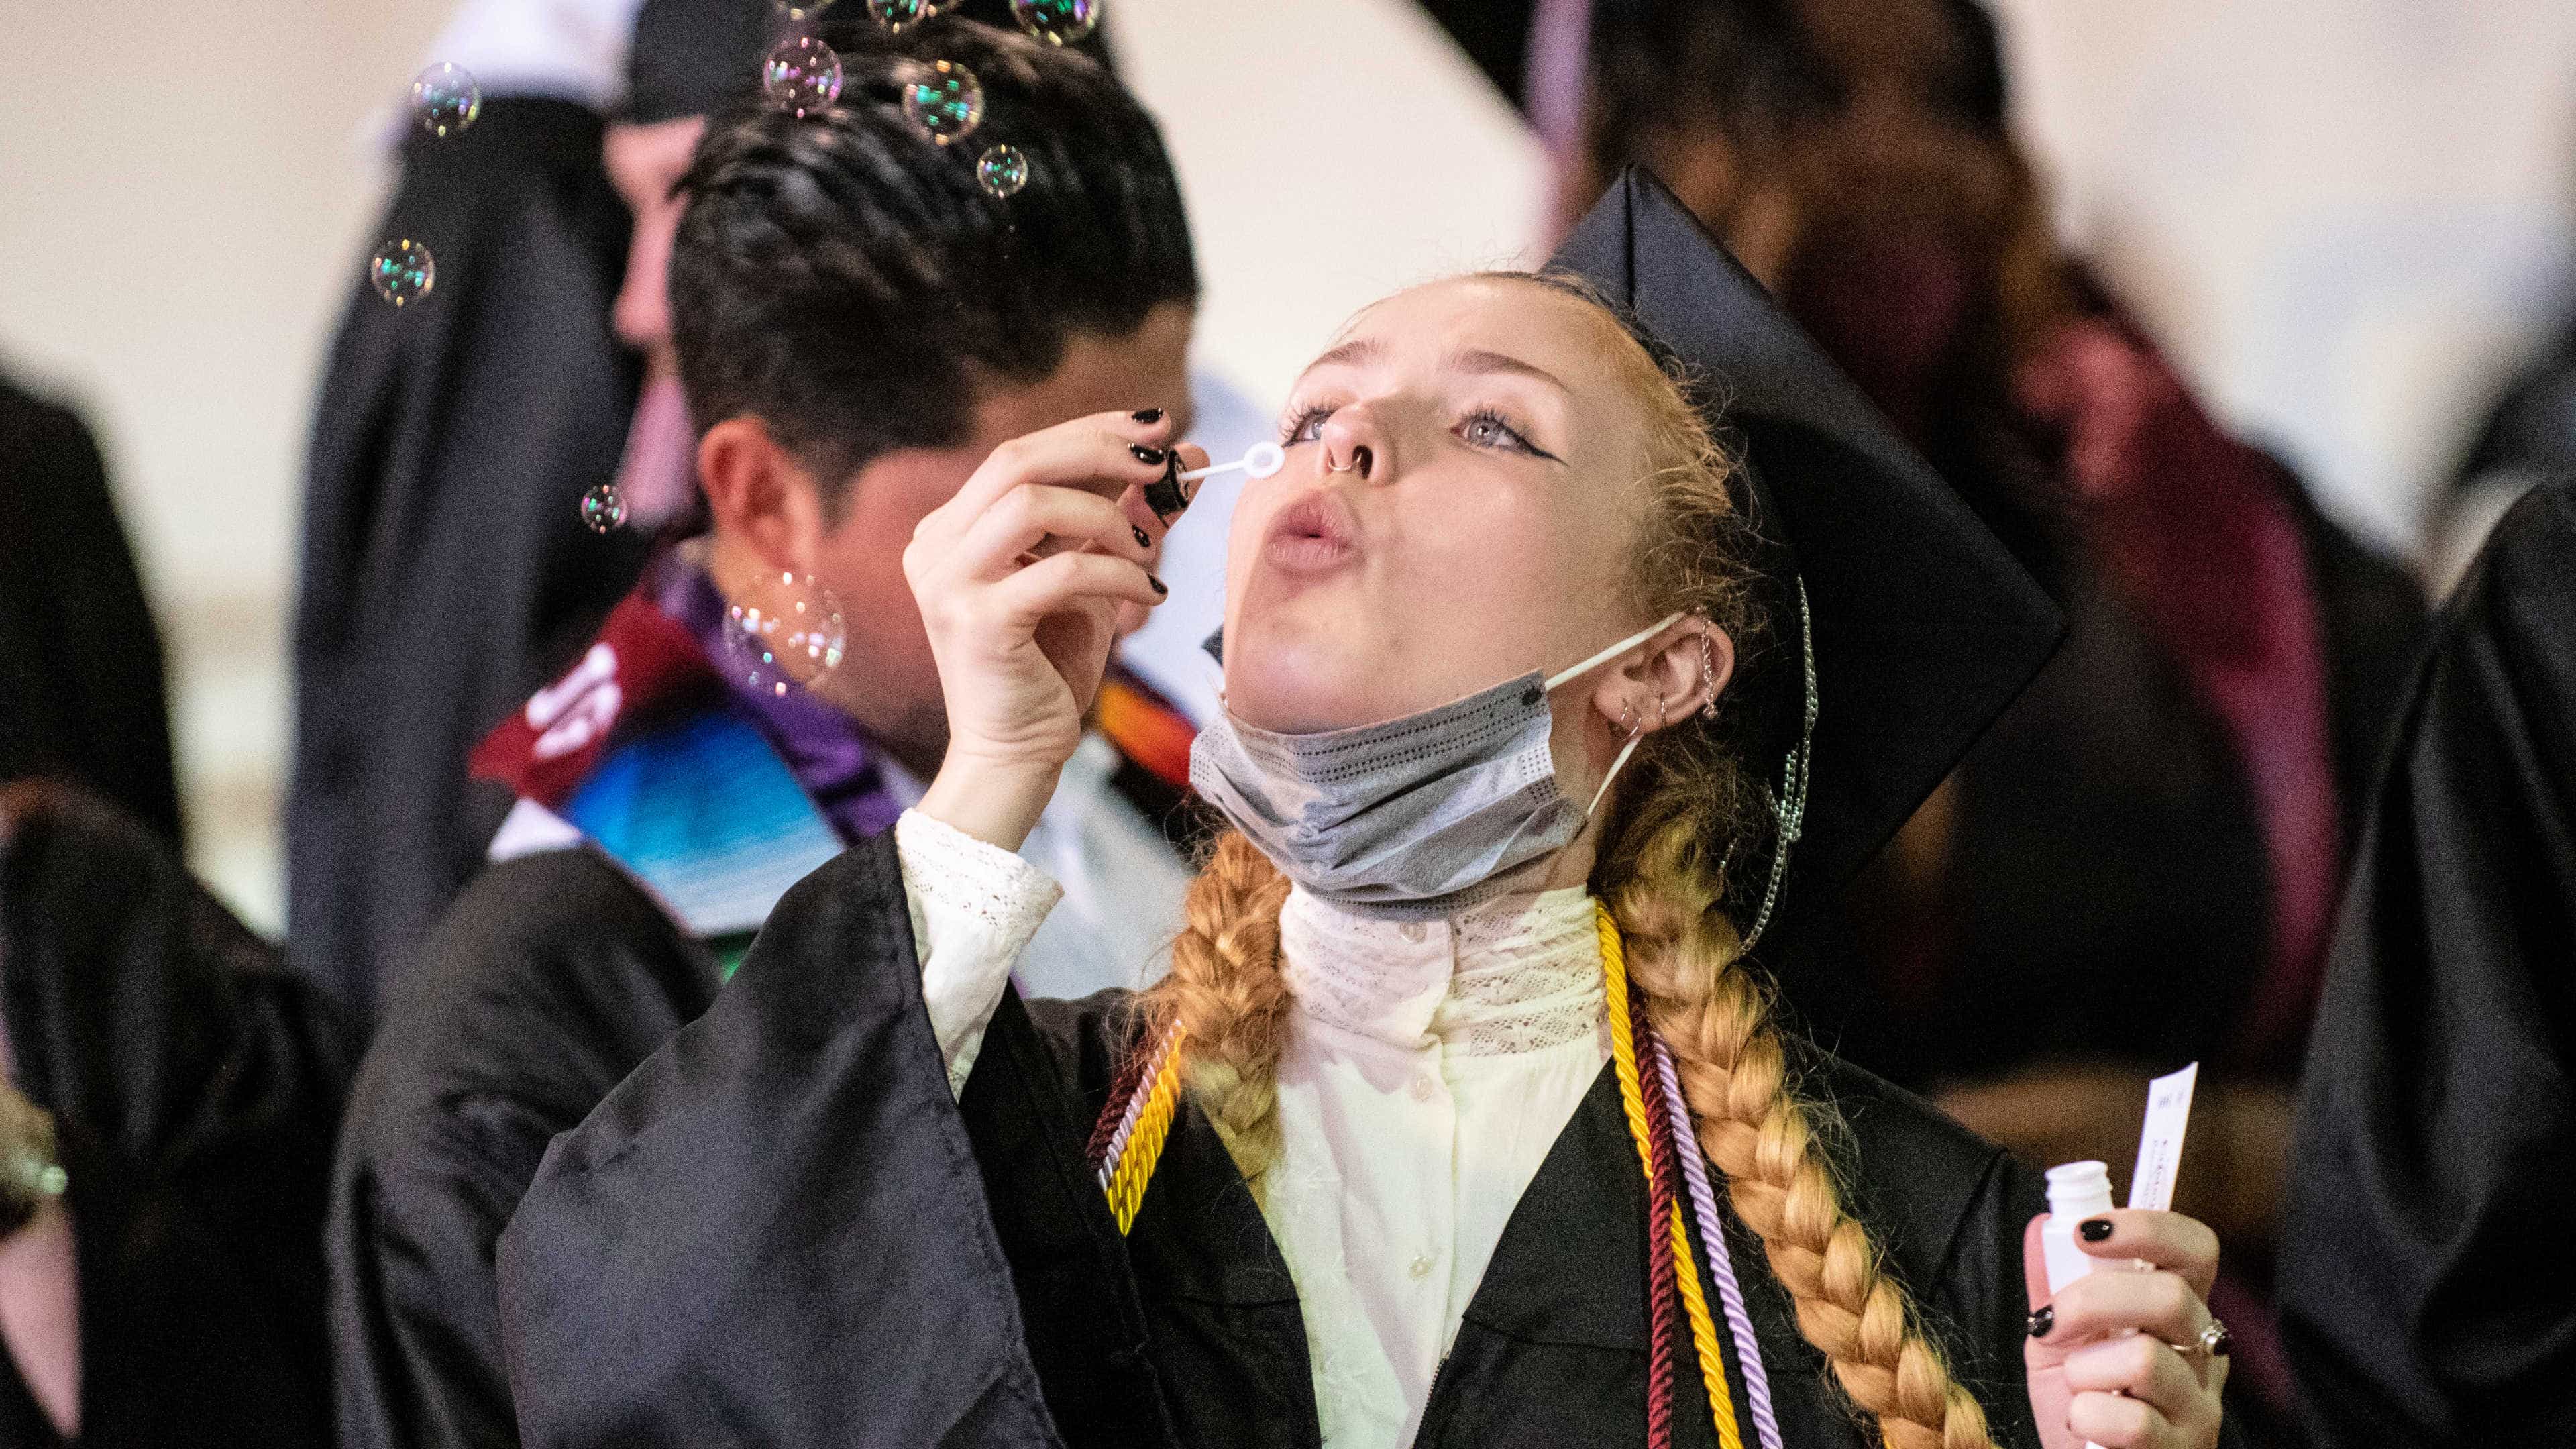 A student blows bubbles while the crowd waits to line up to attend Commencement.